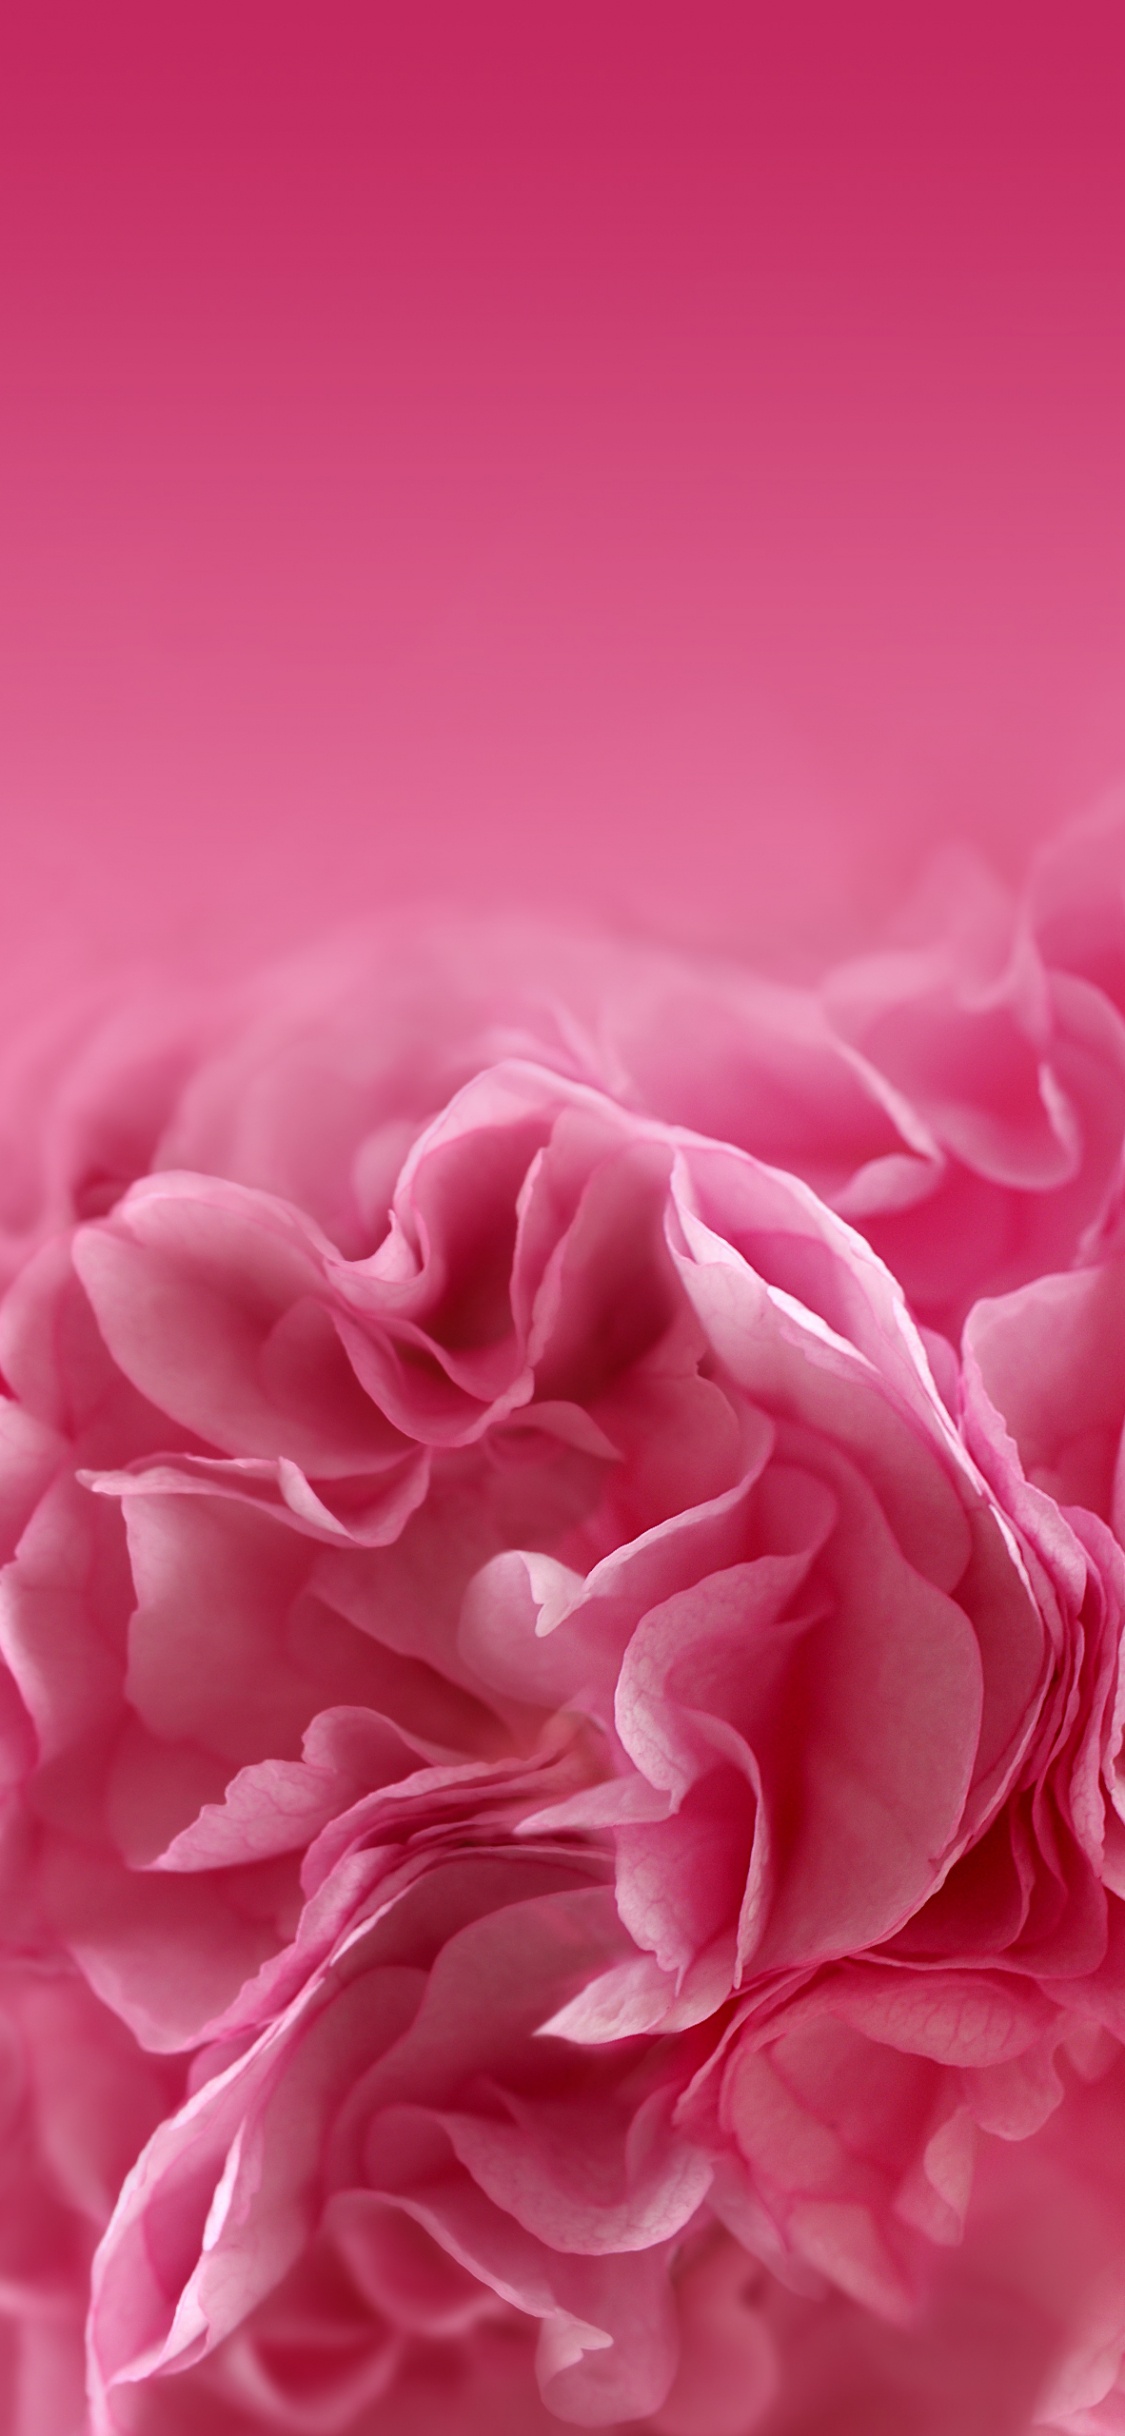 Pink Rose in Close up Photography. Wallpaper in 1125x2436 Resolution